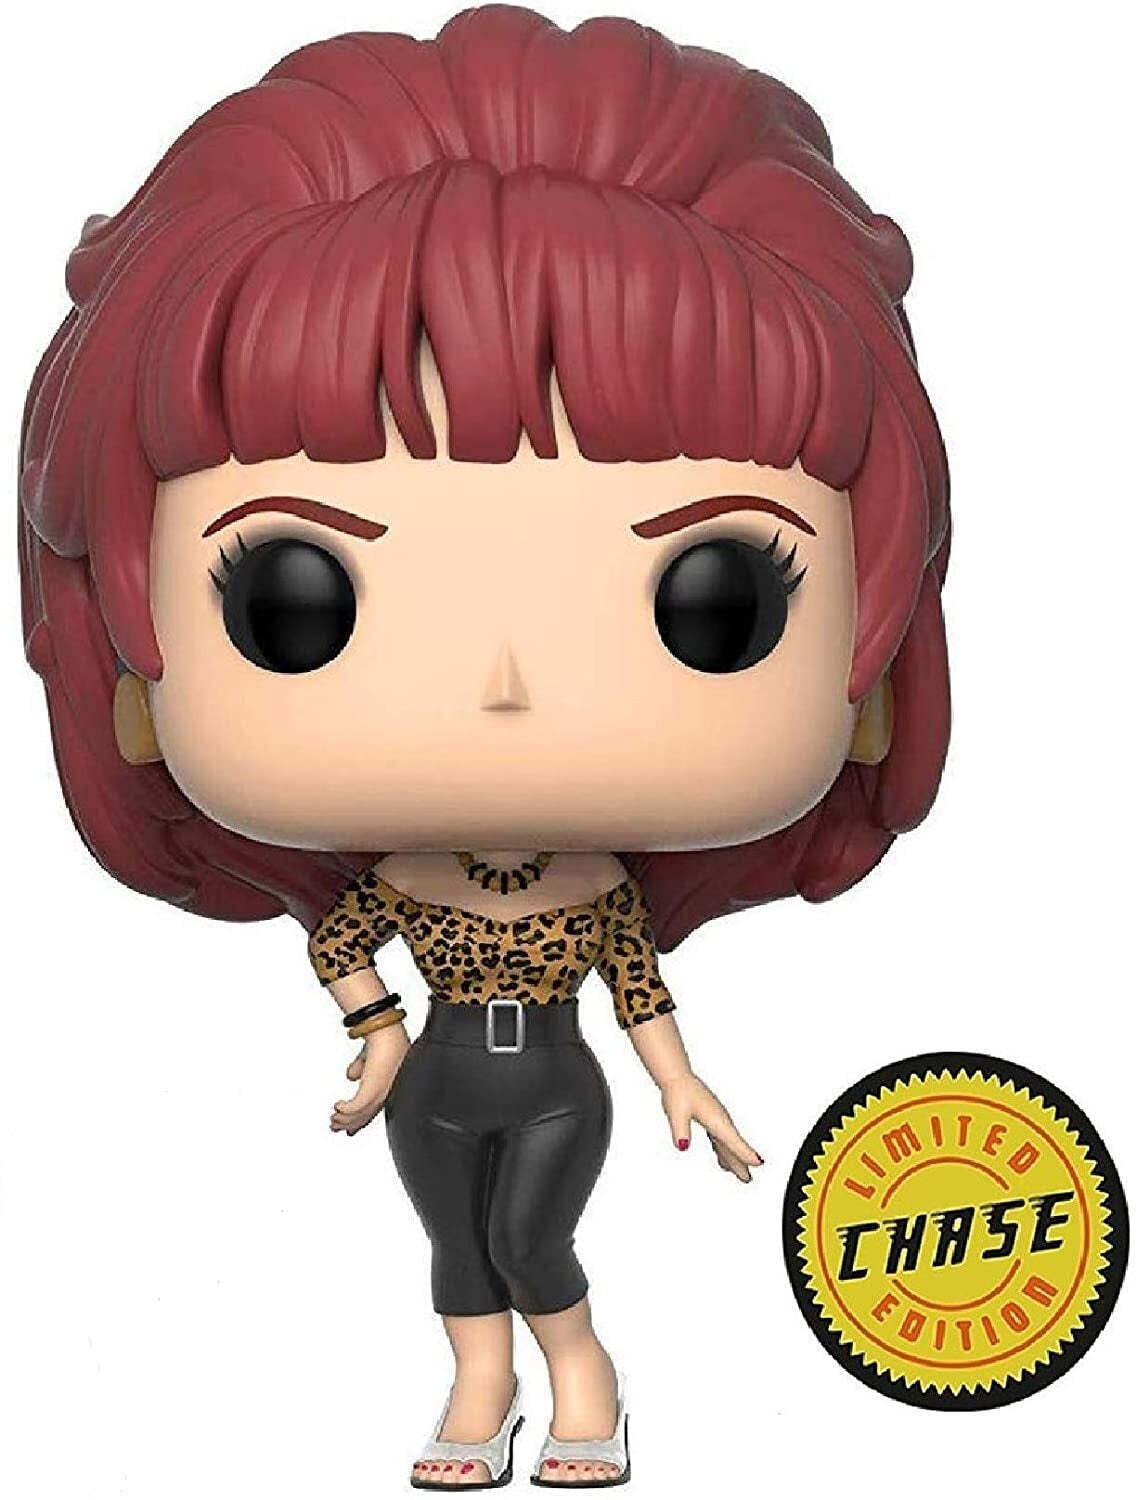 Married with Children: Peggy Bundy (Limited Edition)